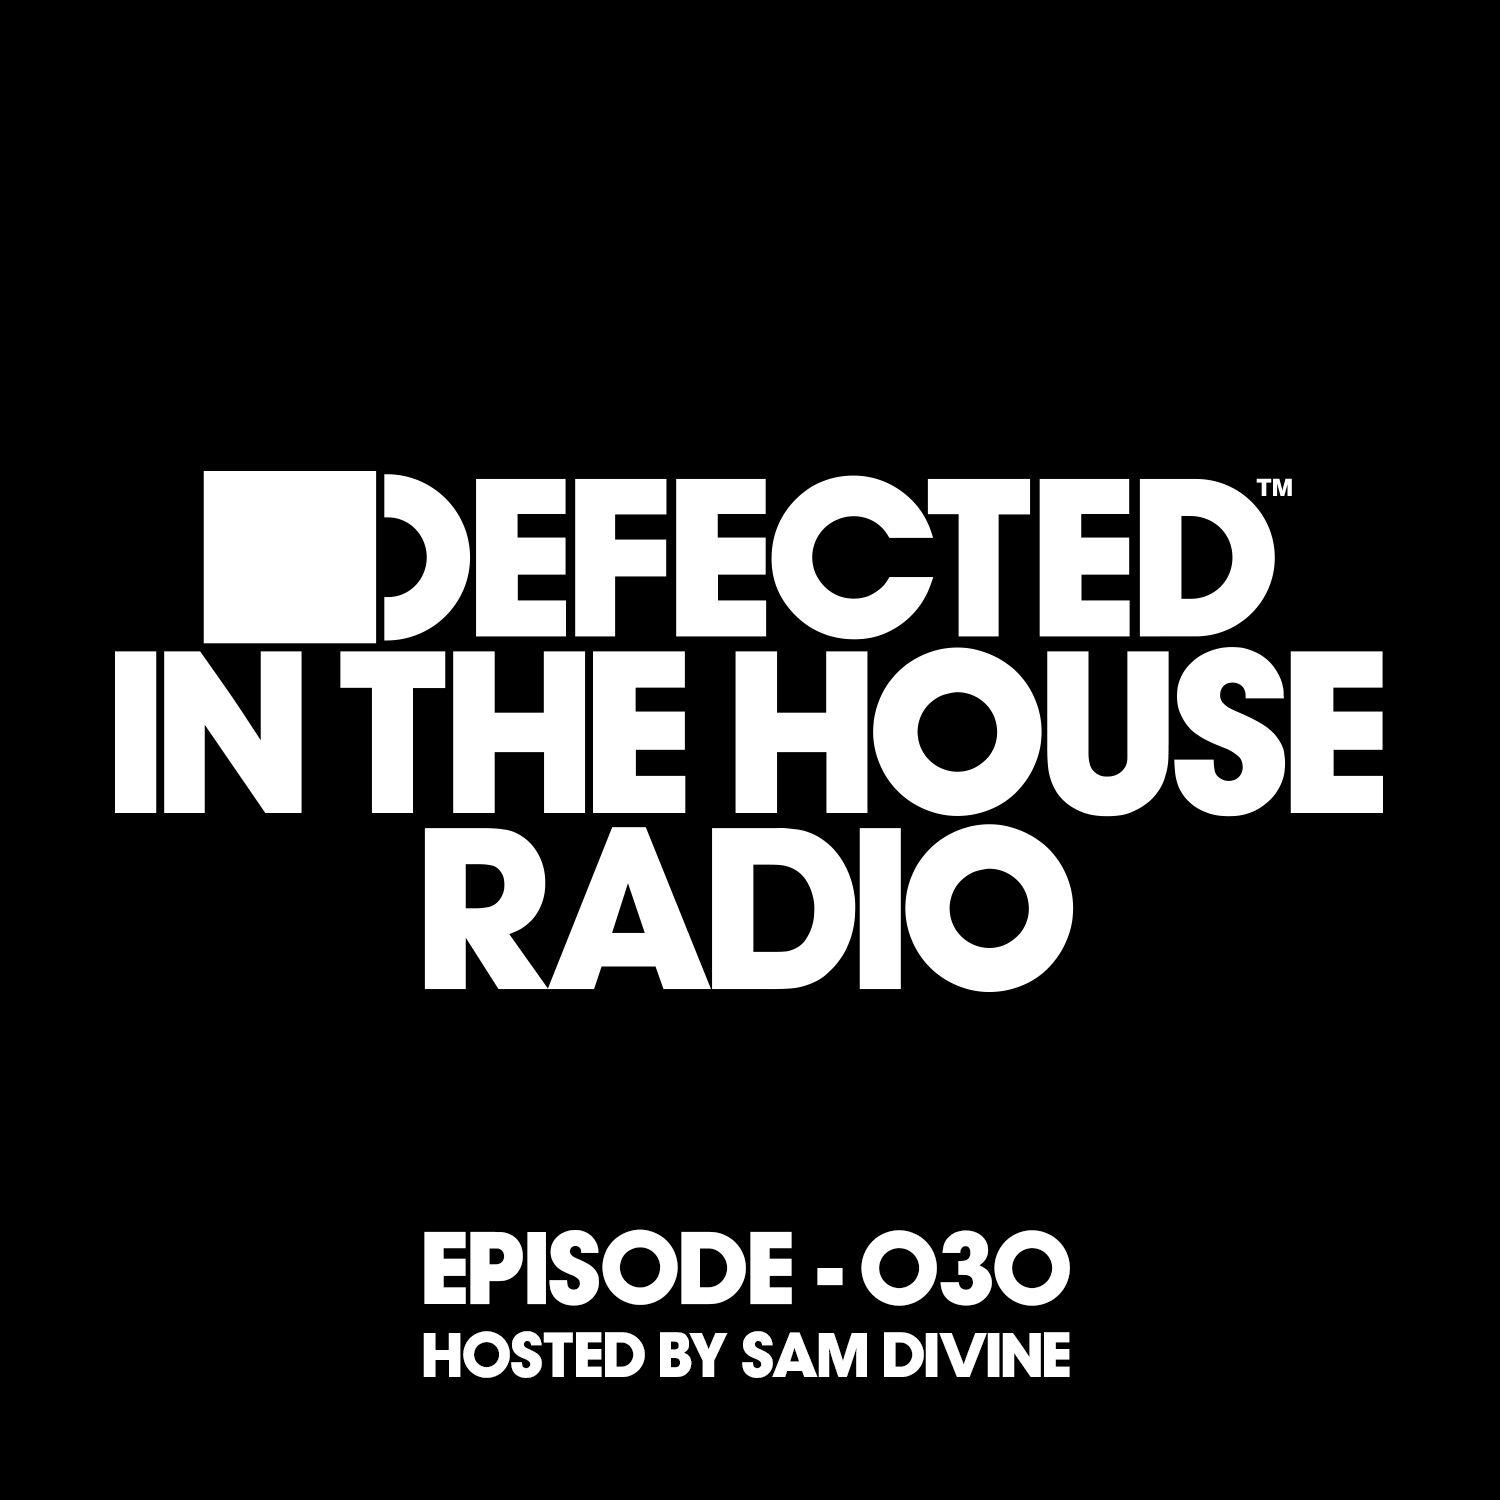 Defected In The House Radio Show Episode 030 (hosted by Sam Divine) [Mixed]